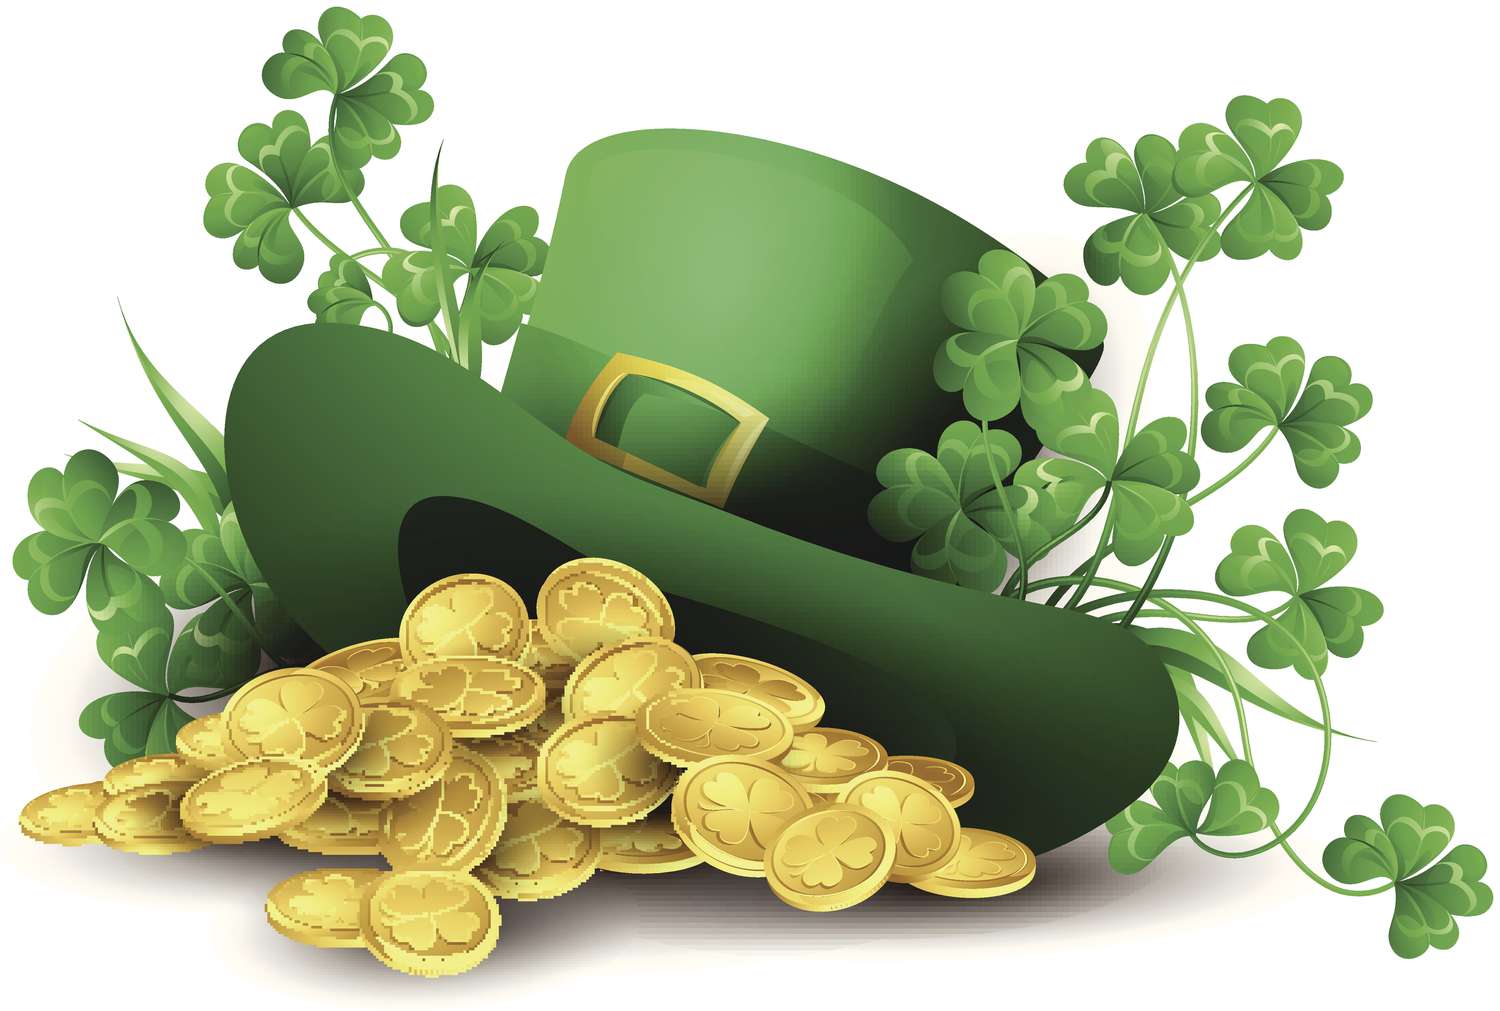 Illustration of a green hat with a gold buckle. Underneath the hat is a pile of gold coins and around it are many four-leaf clovers.